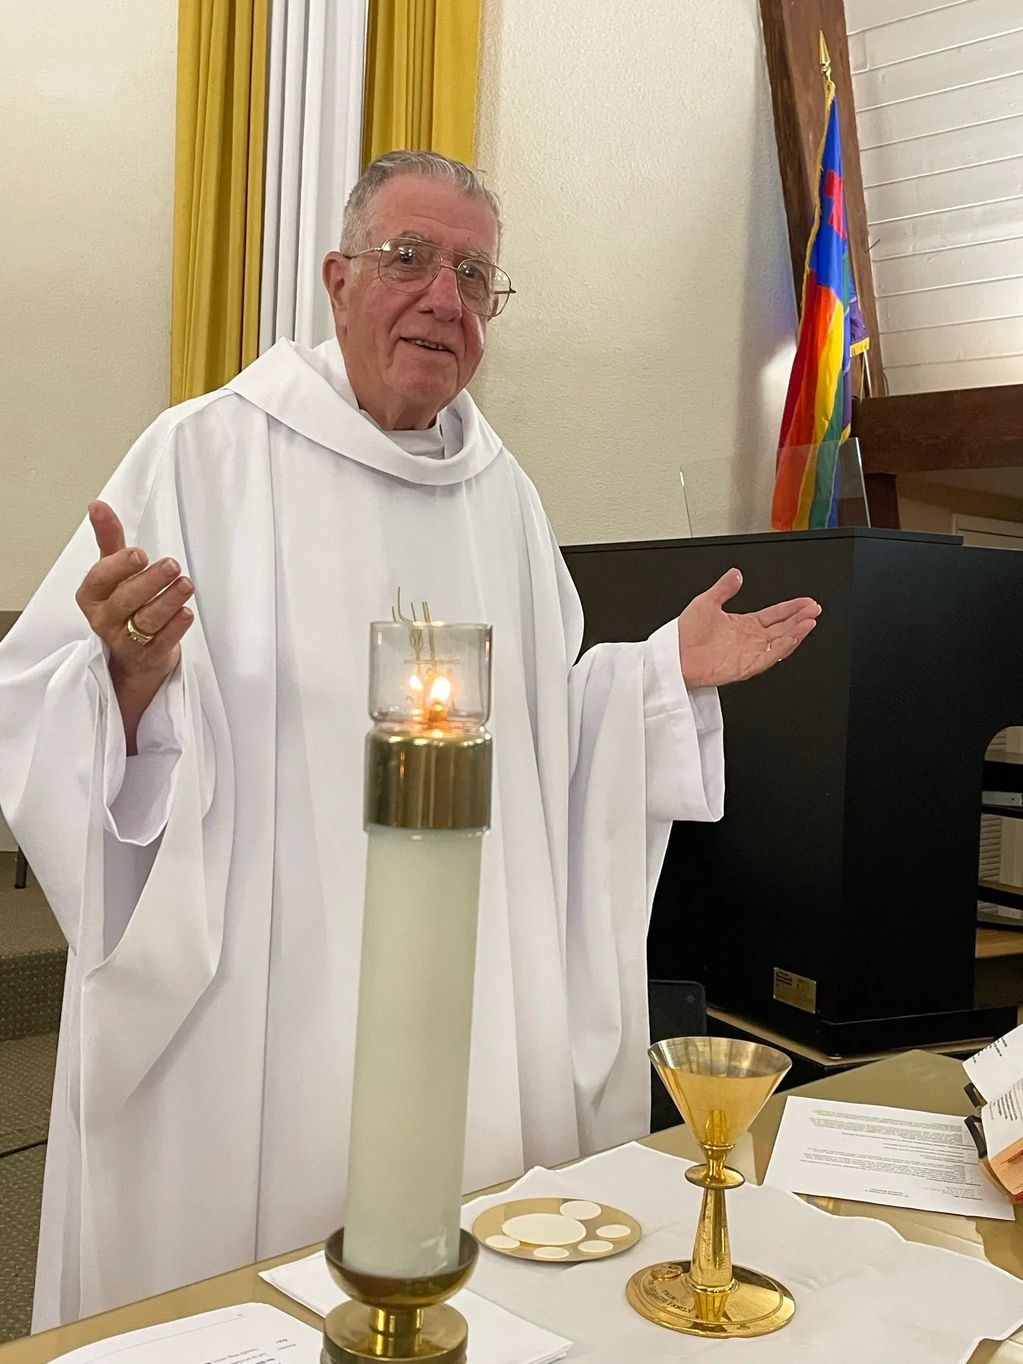 Father Gene celebrates Mass with our Dignity Family during the joyous season of Easter in 2023